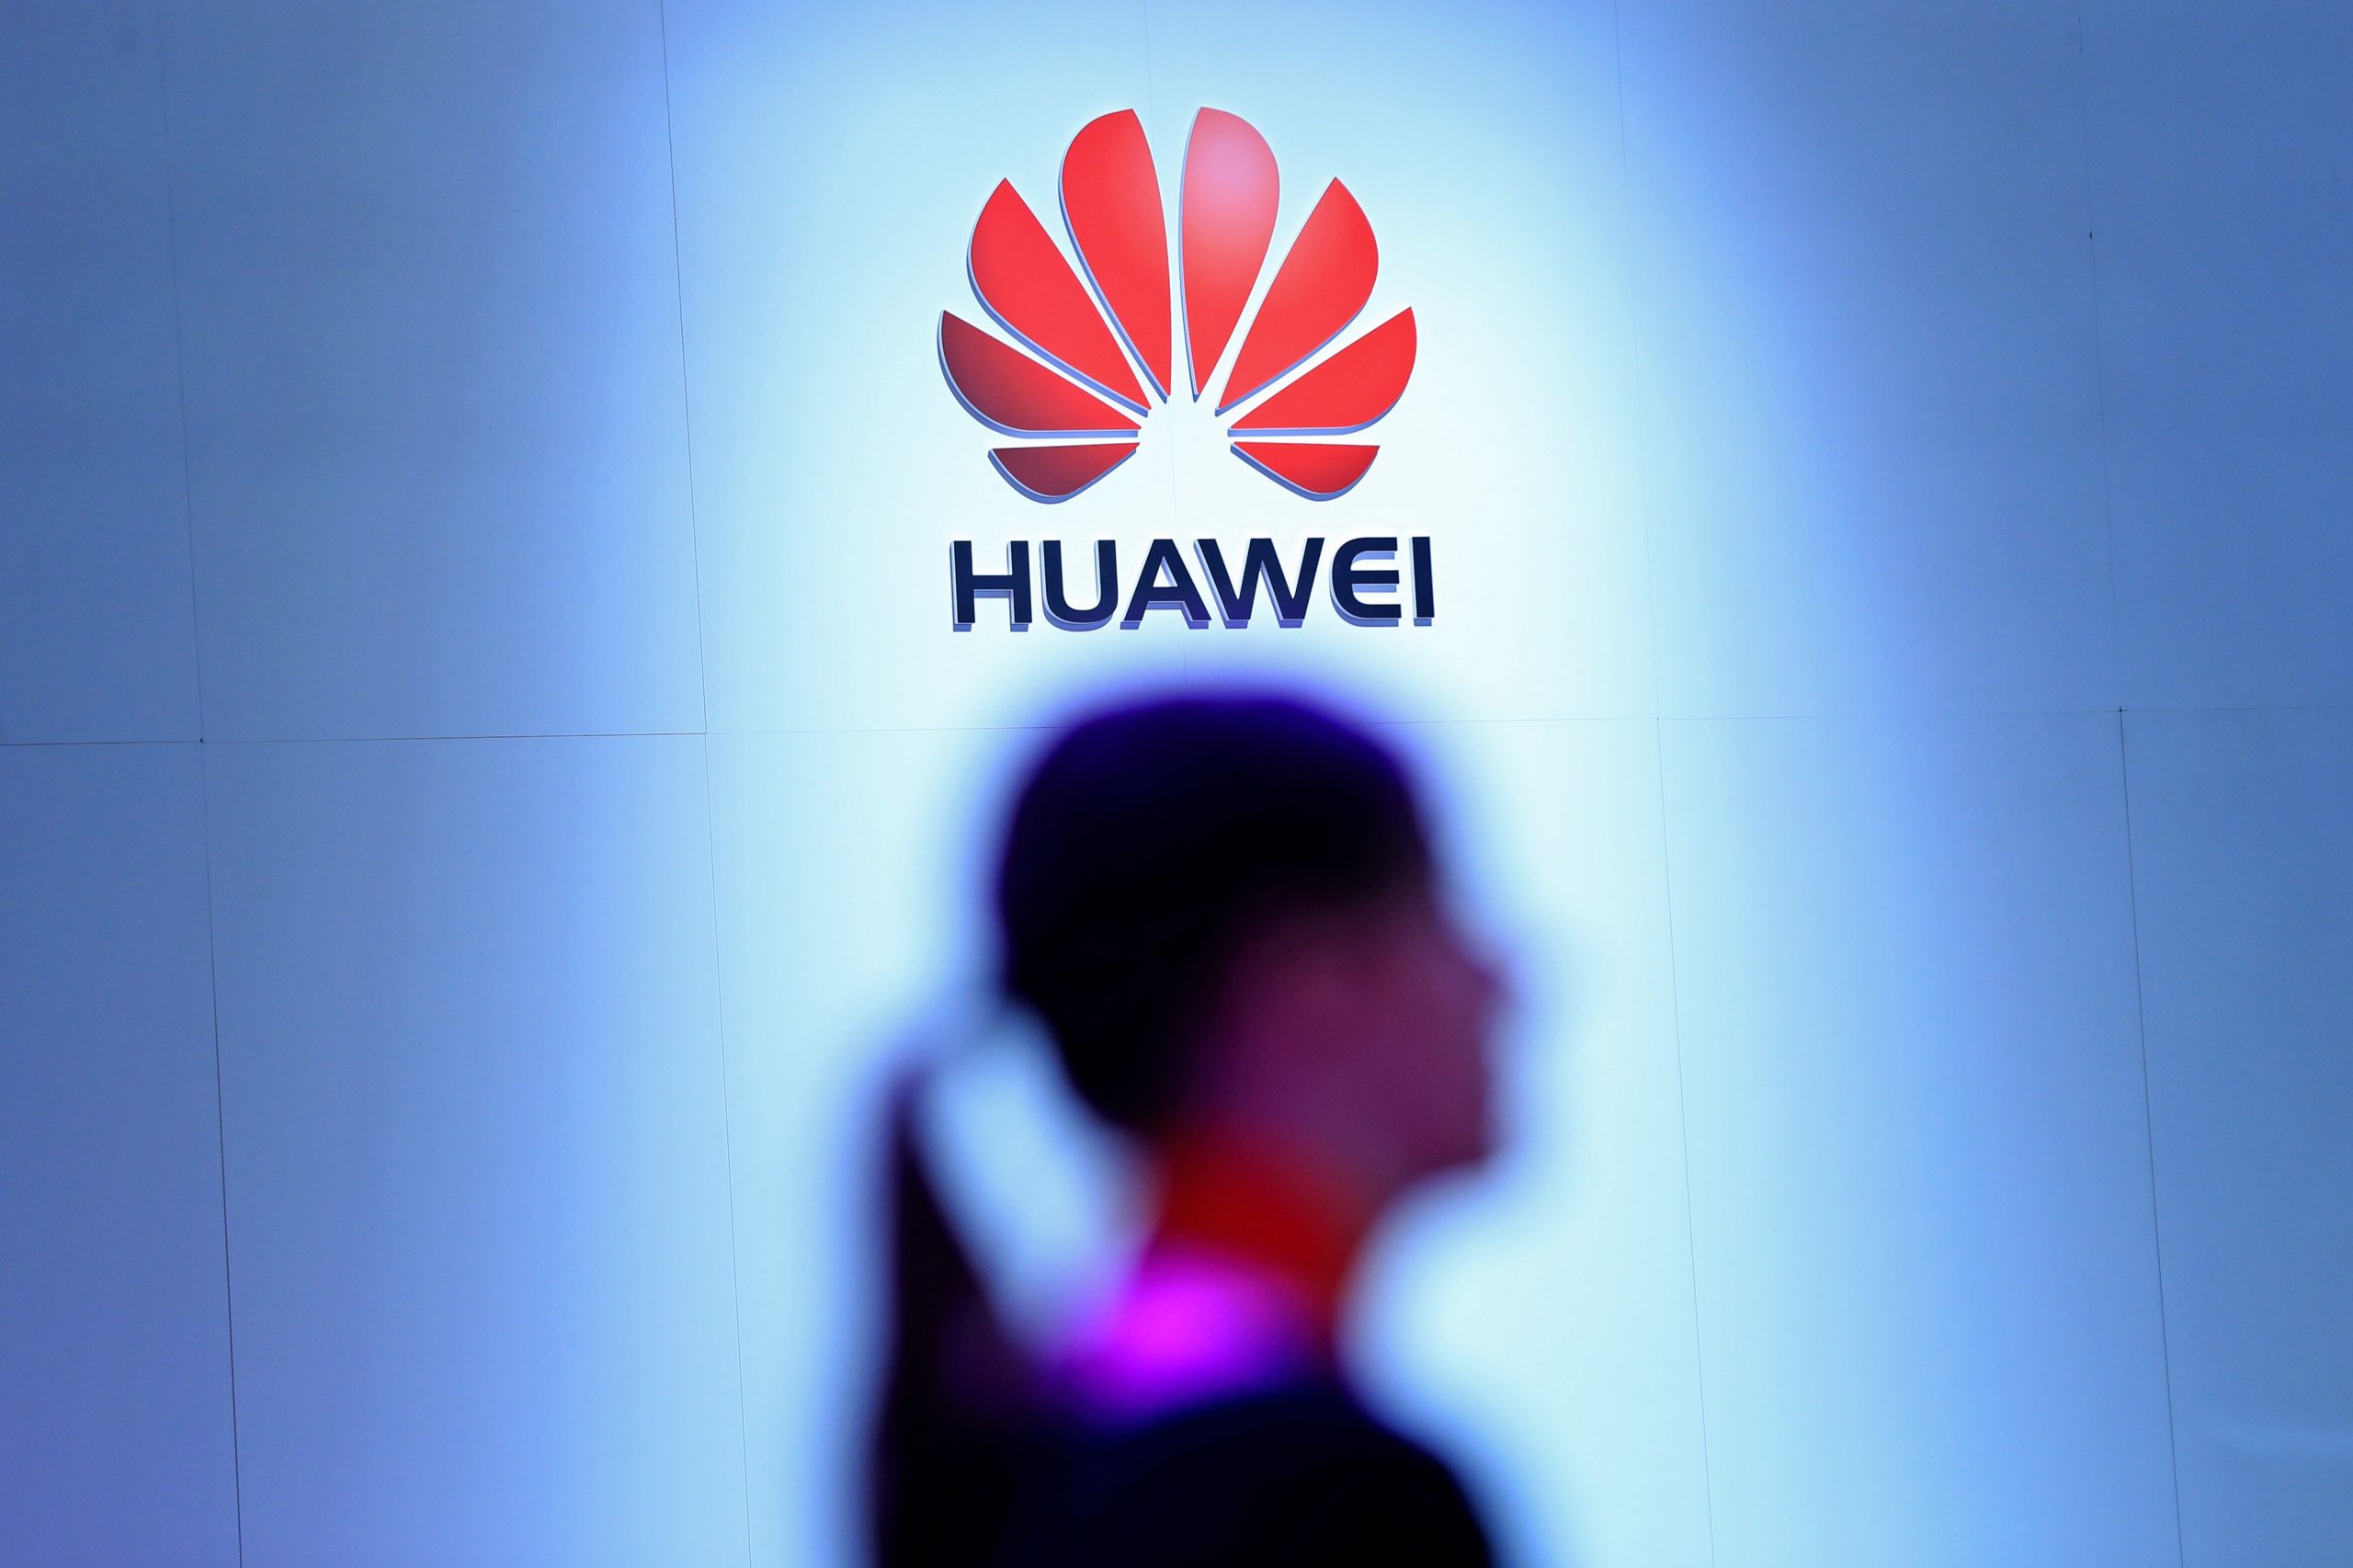 China smartphone market to rebound in Q4 2020, Huawei to lose market share to other brands: Report